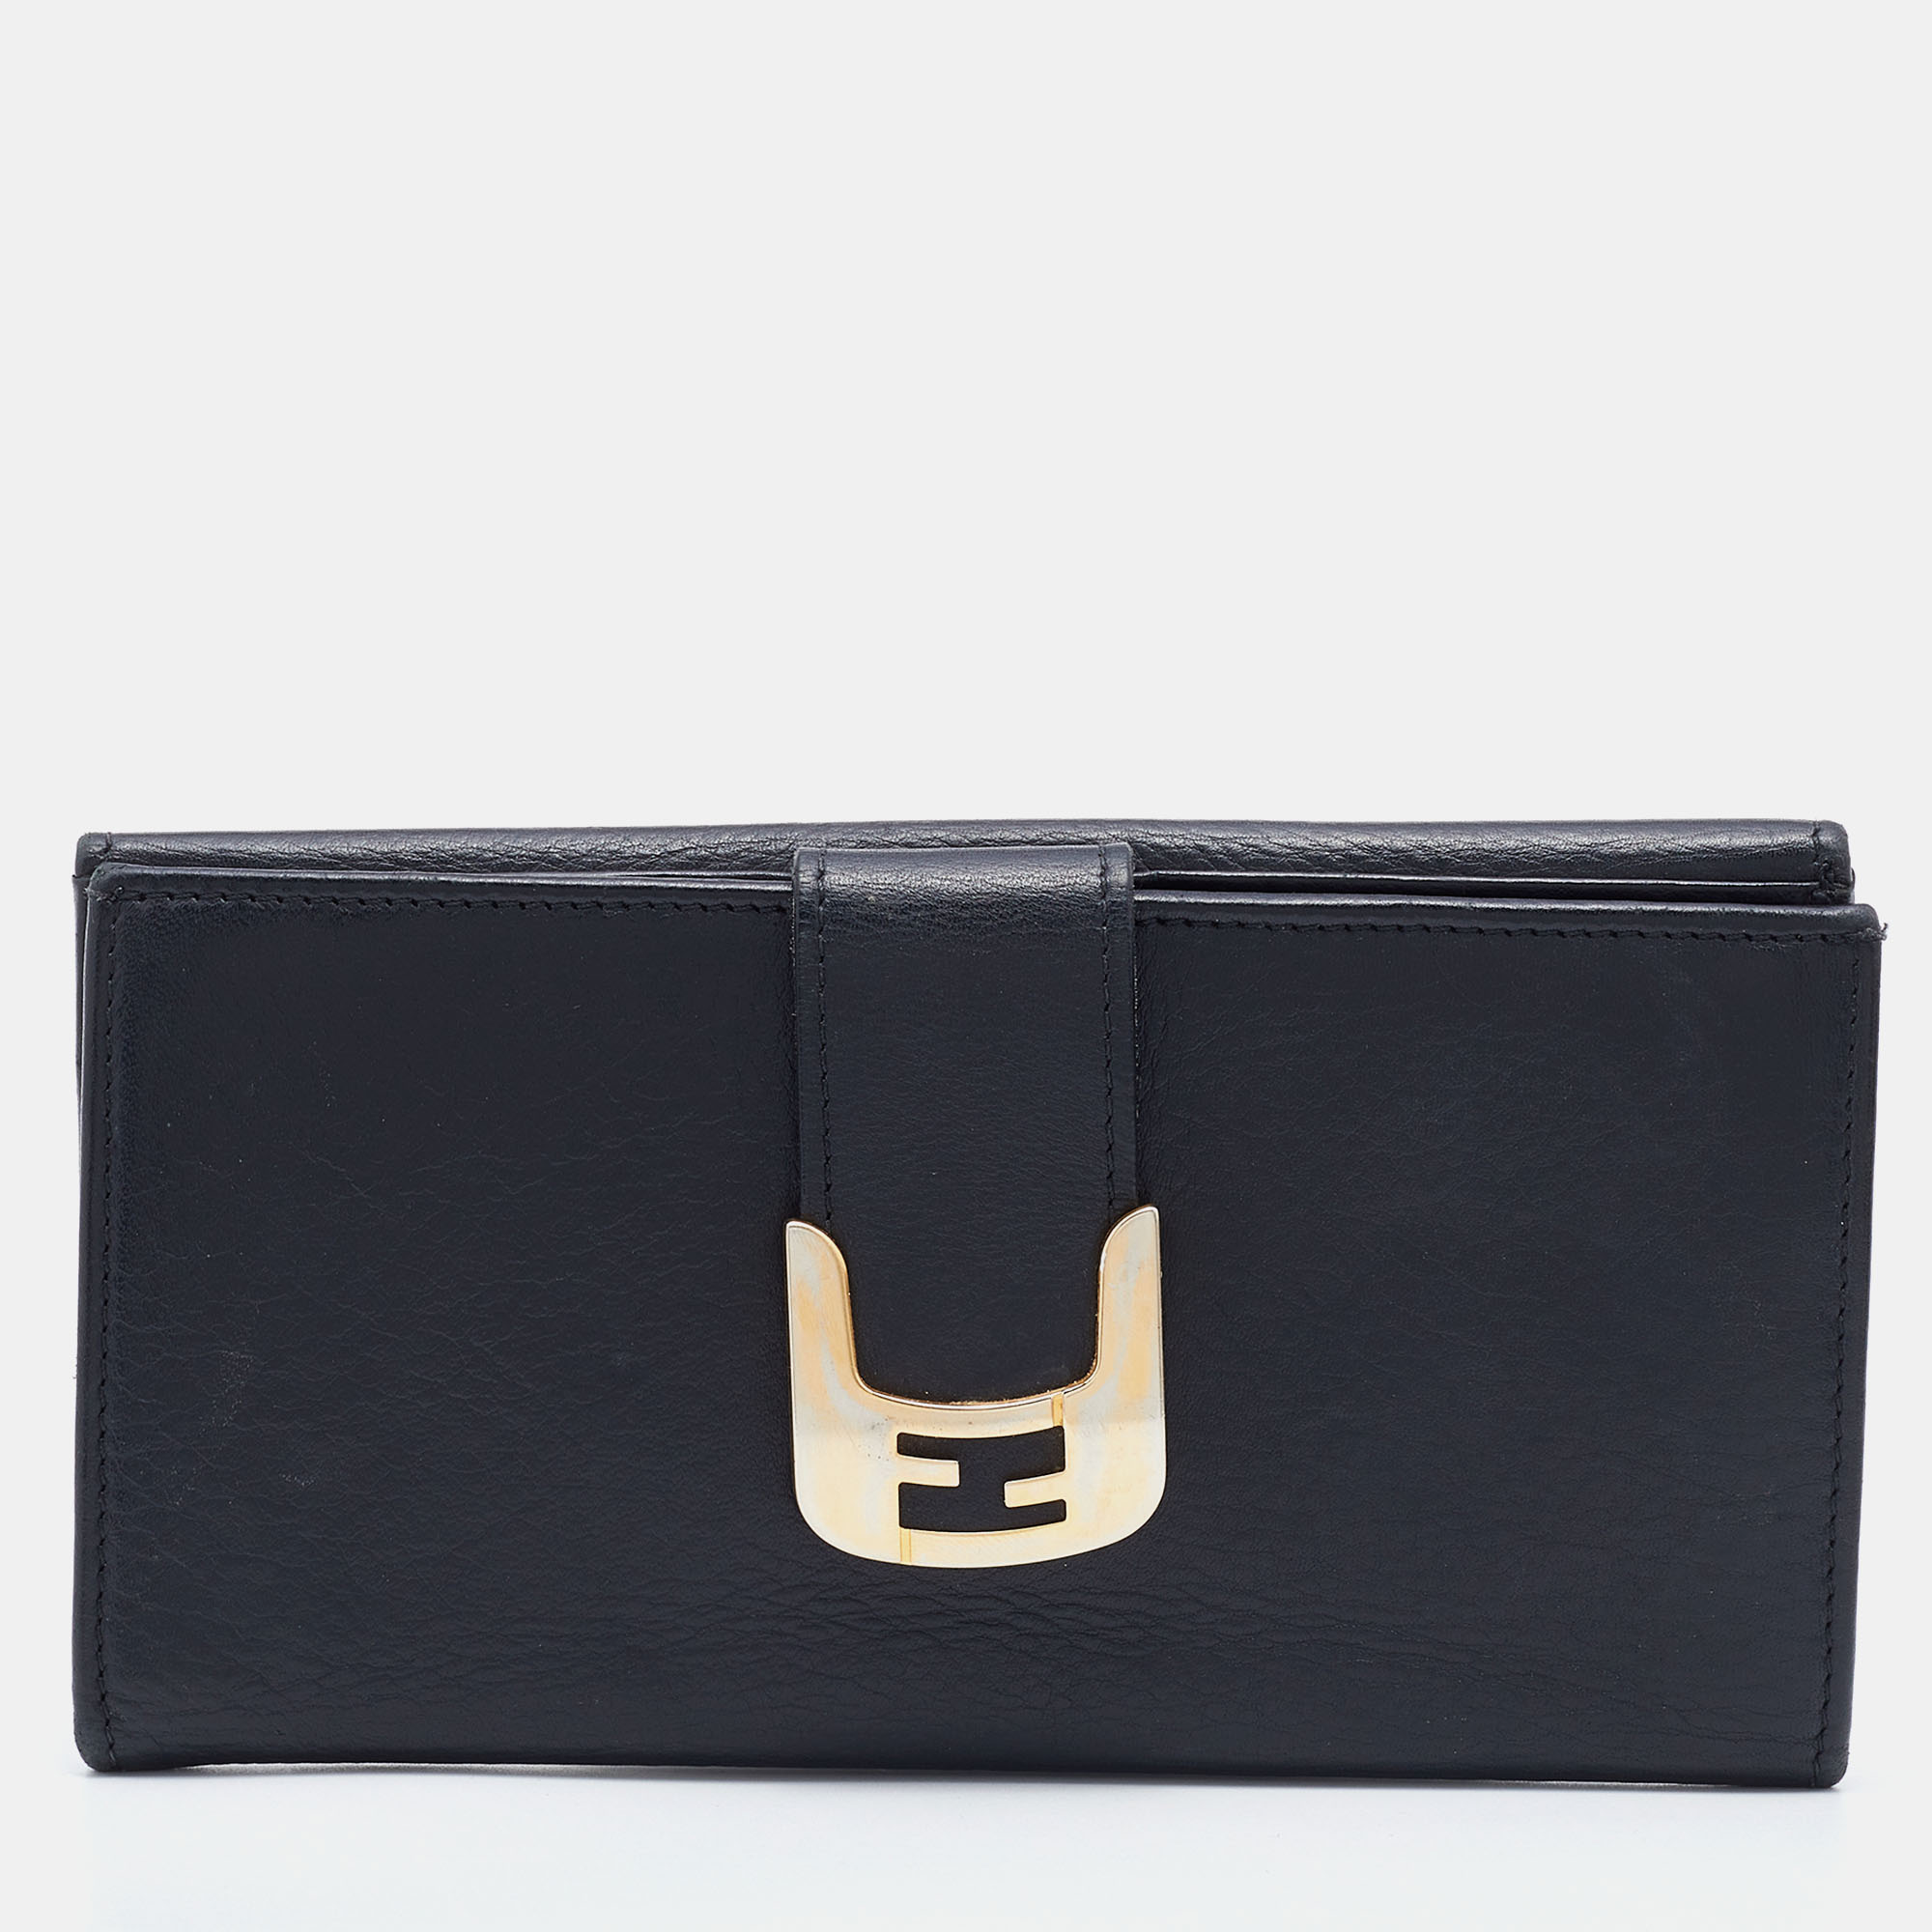 Pre-owned Fendi Black Leather Flap Continental Wallet